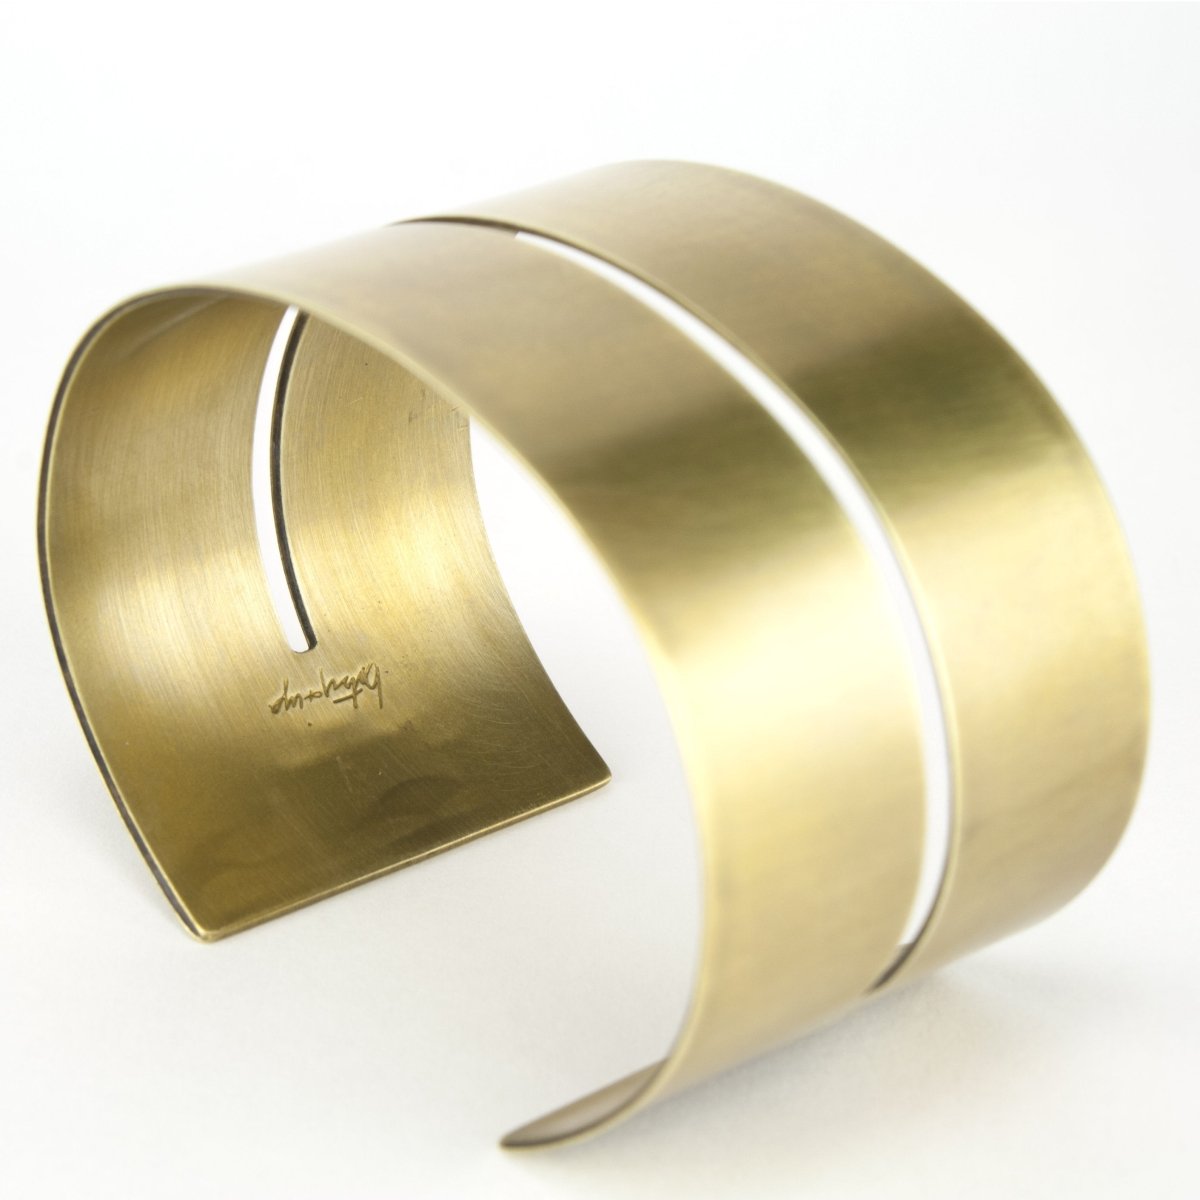 Wide, bold, brass cuff bracelet with a cutout that runs through the center of the cuff and stops just short of either end of the cuff, with the betsy & iya logo engraved on the inside. Hand-crafted in Portland, Oregon. 